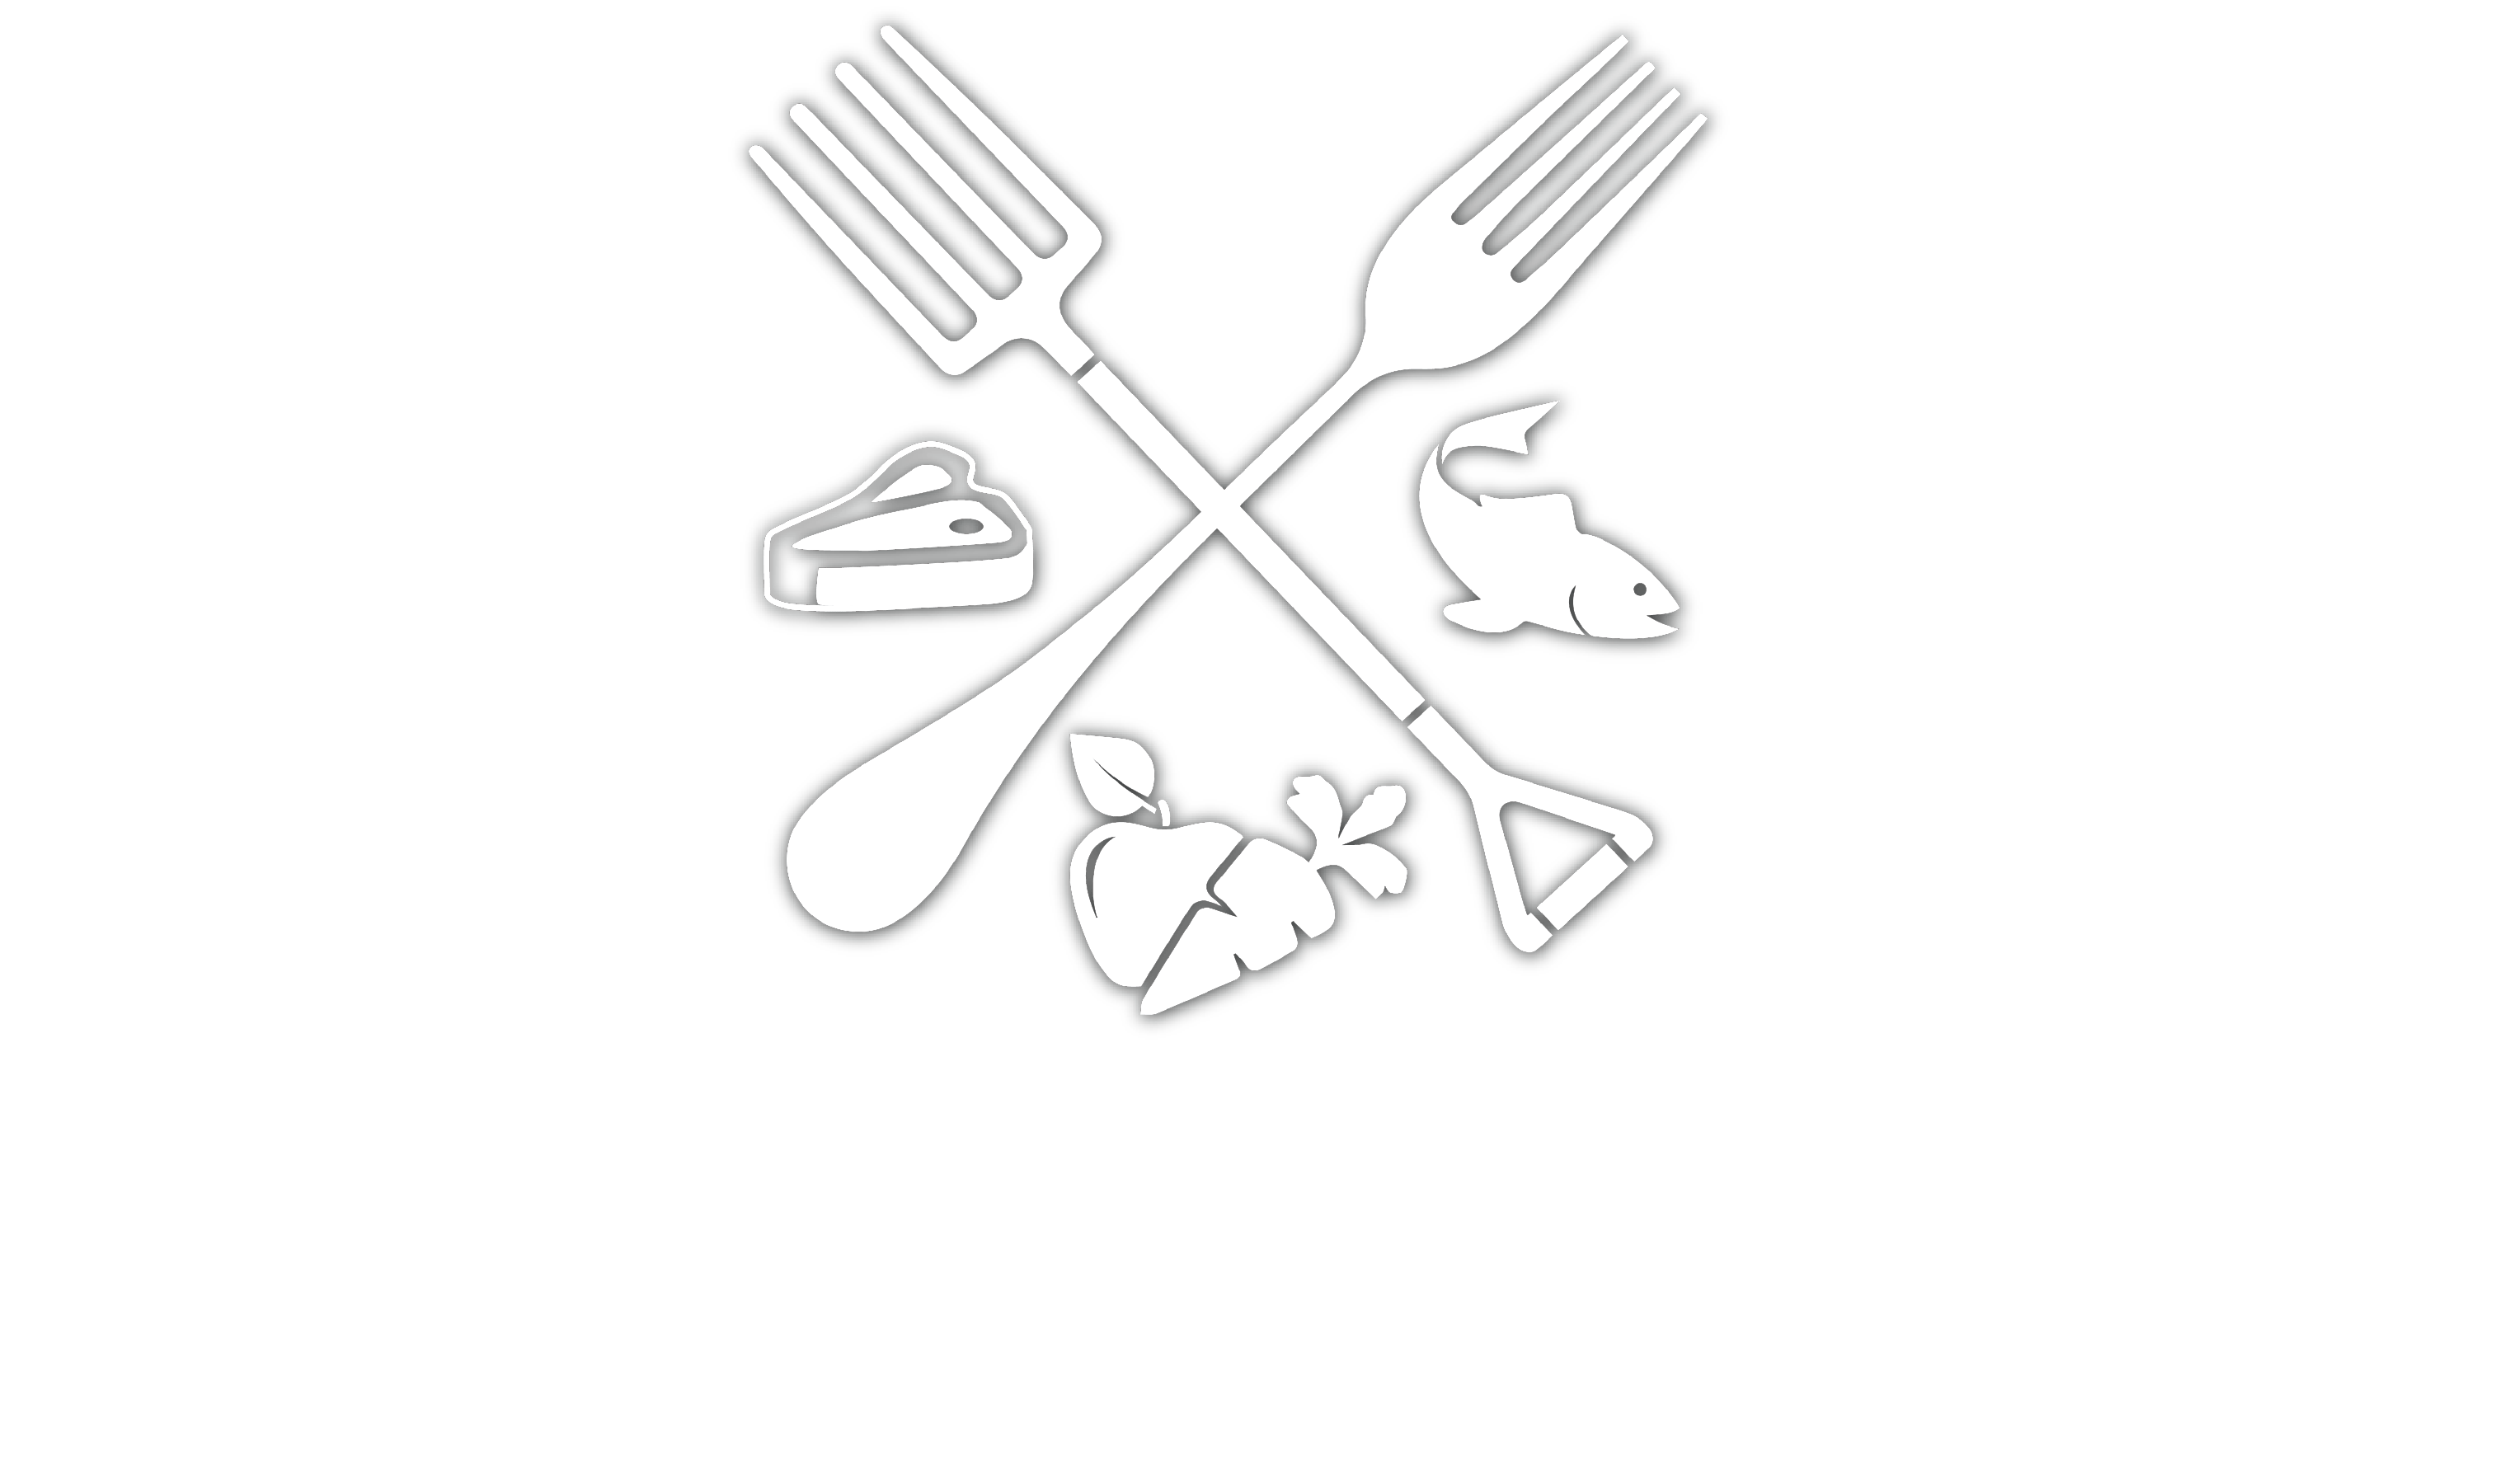 Top Cafe Logo - Top of the Hill Market and Cafe Chestnut Hill, Philadelphia, PA